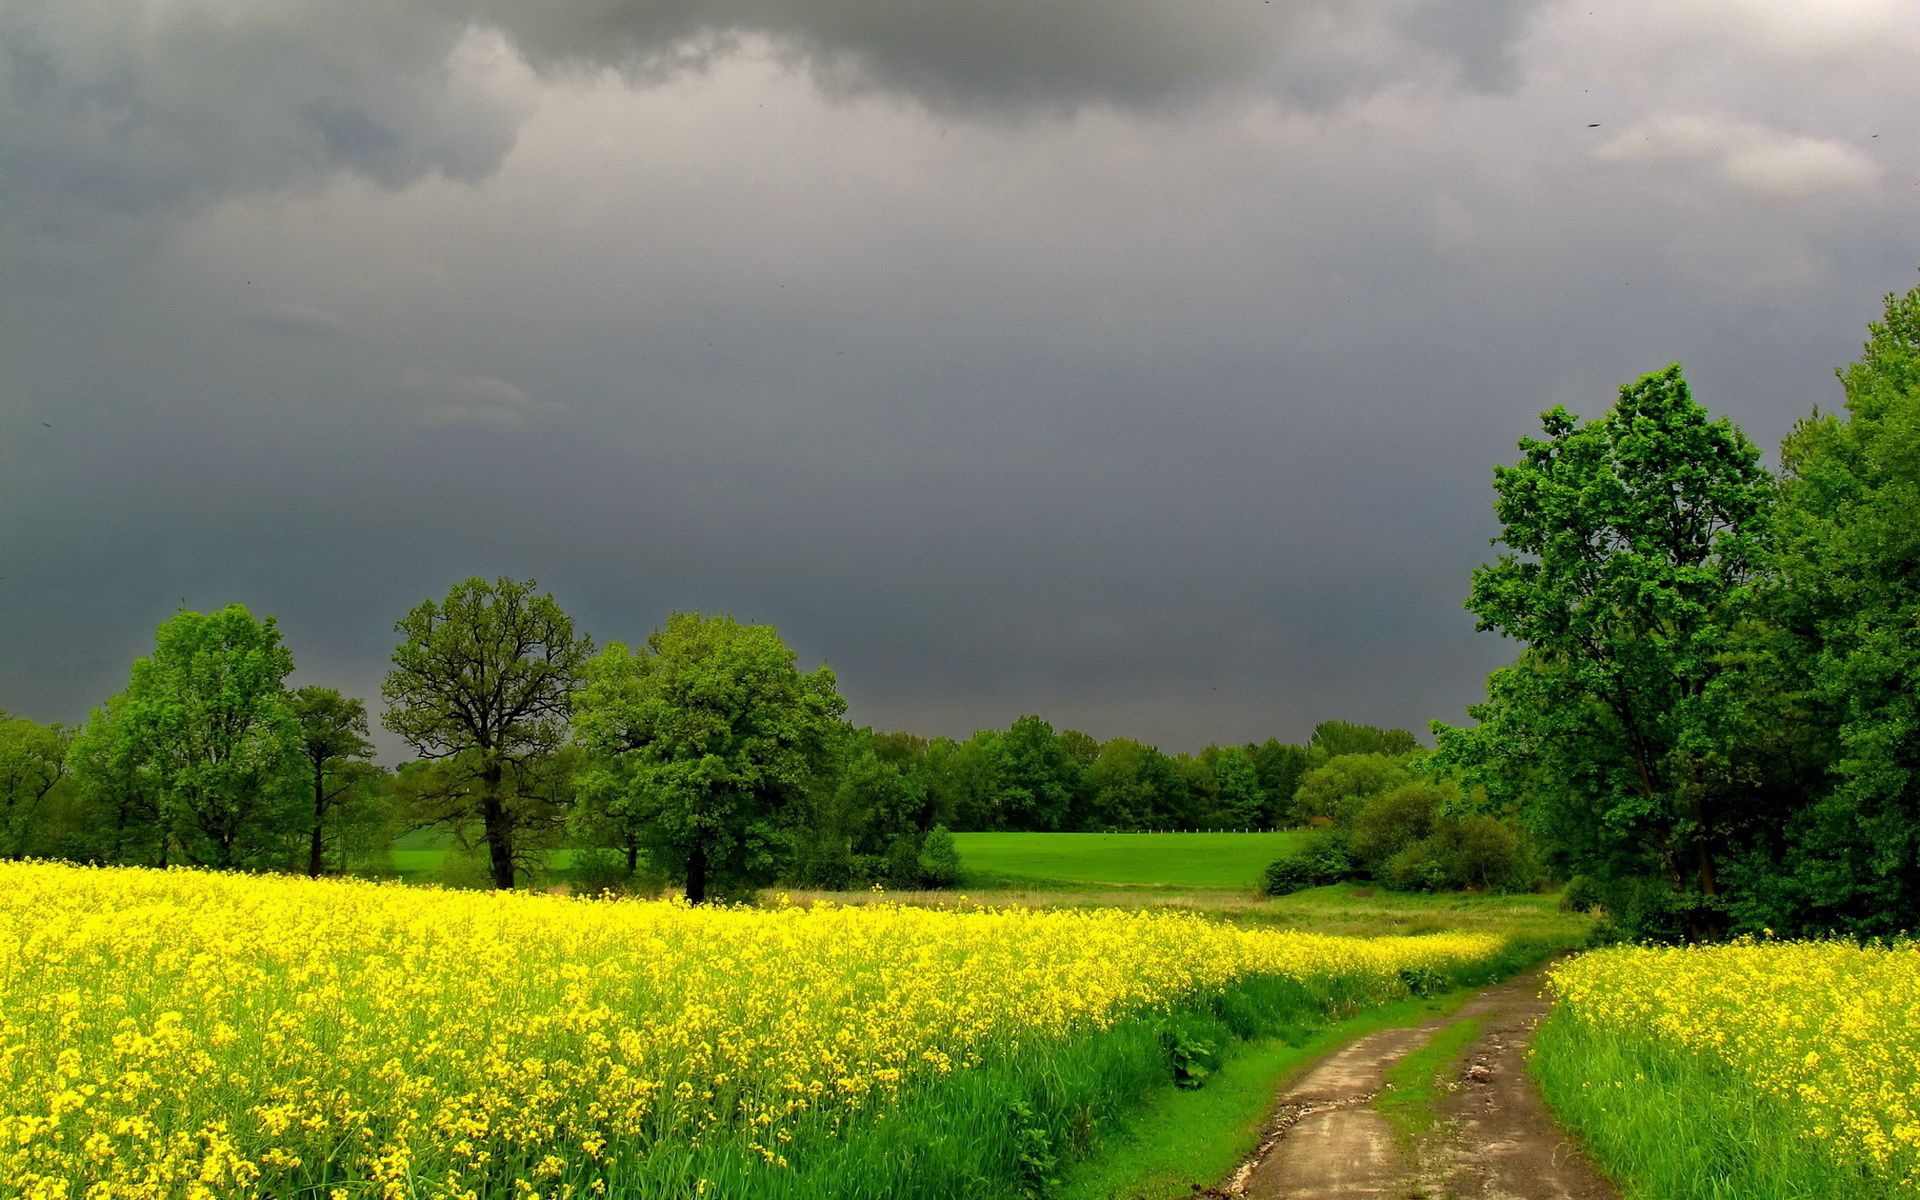 android road, summer, nature, flowers, mainly cloudy, overcast